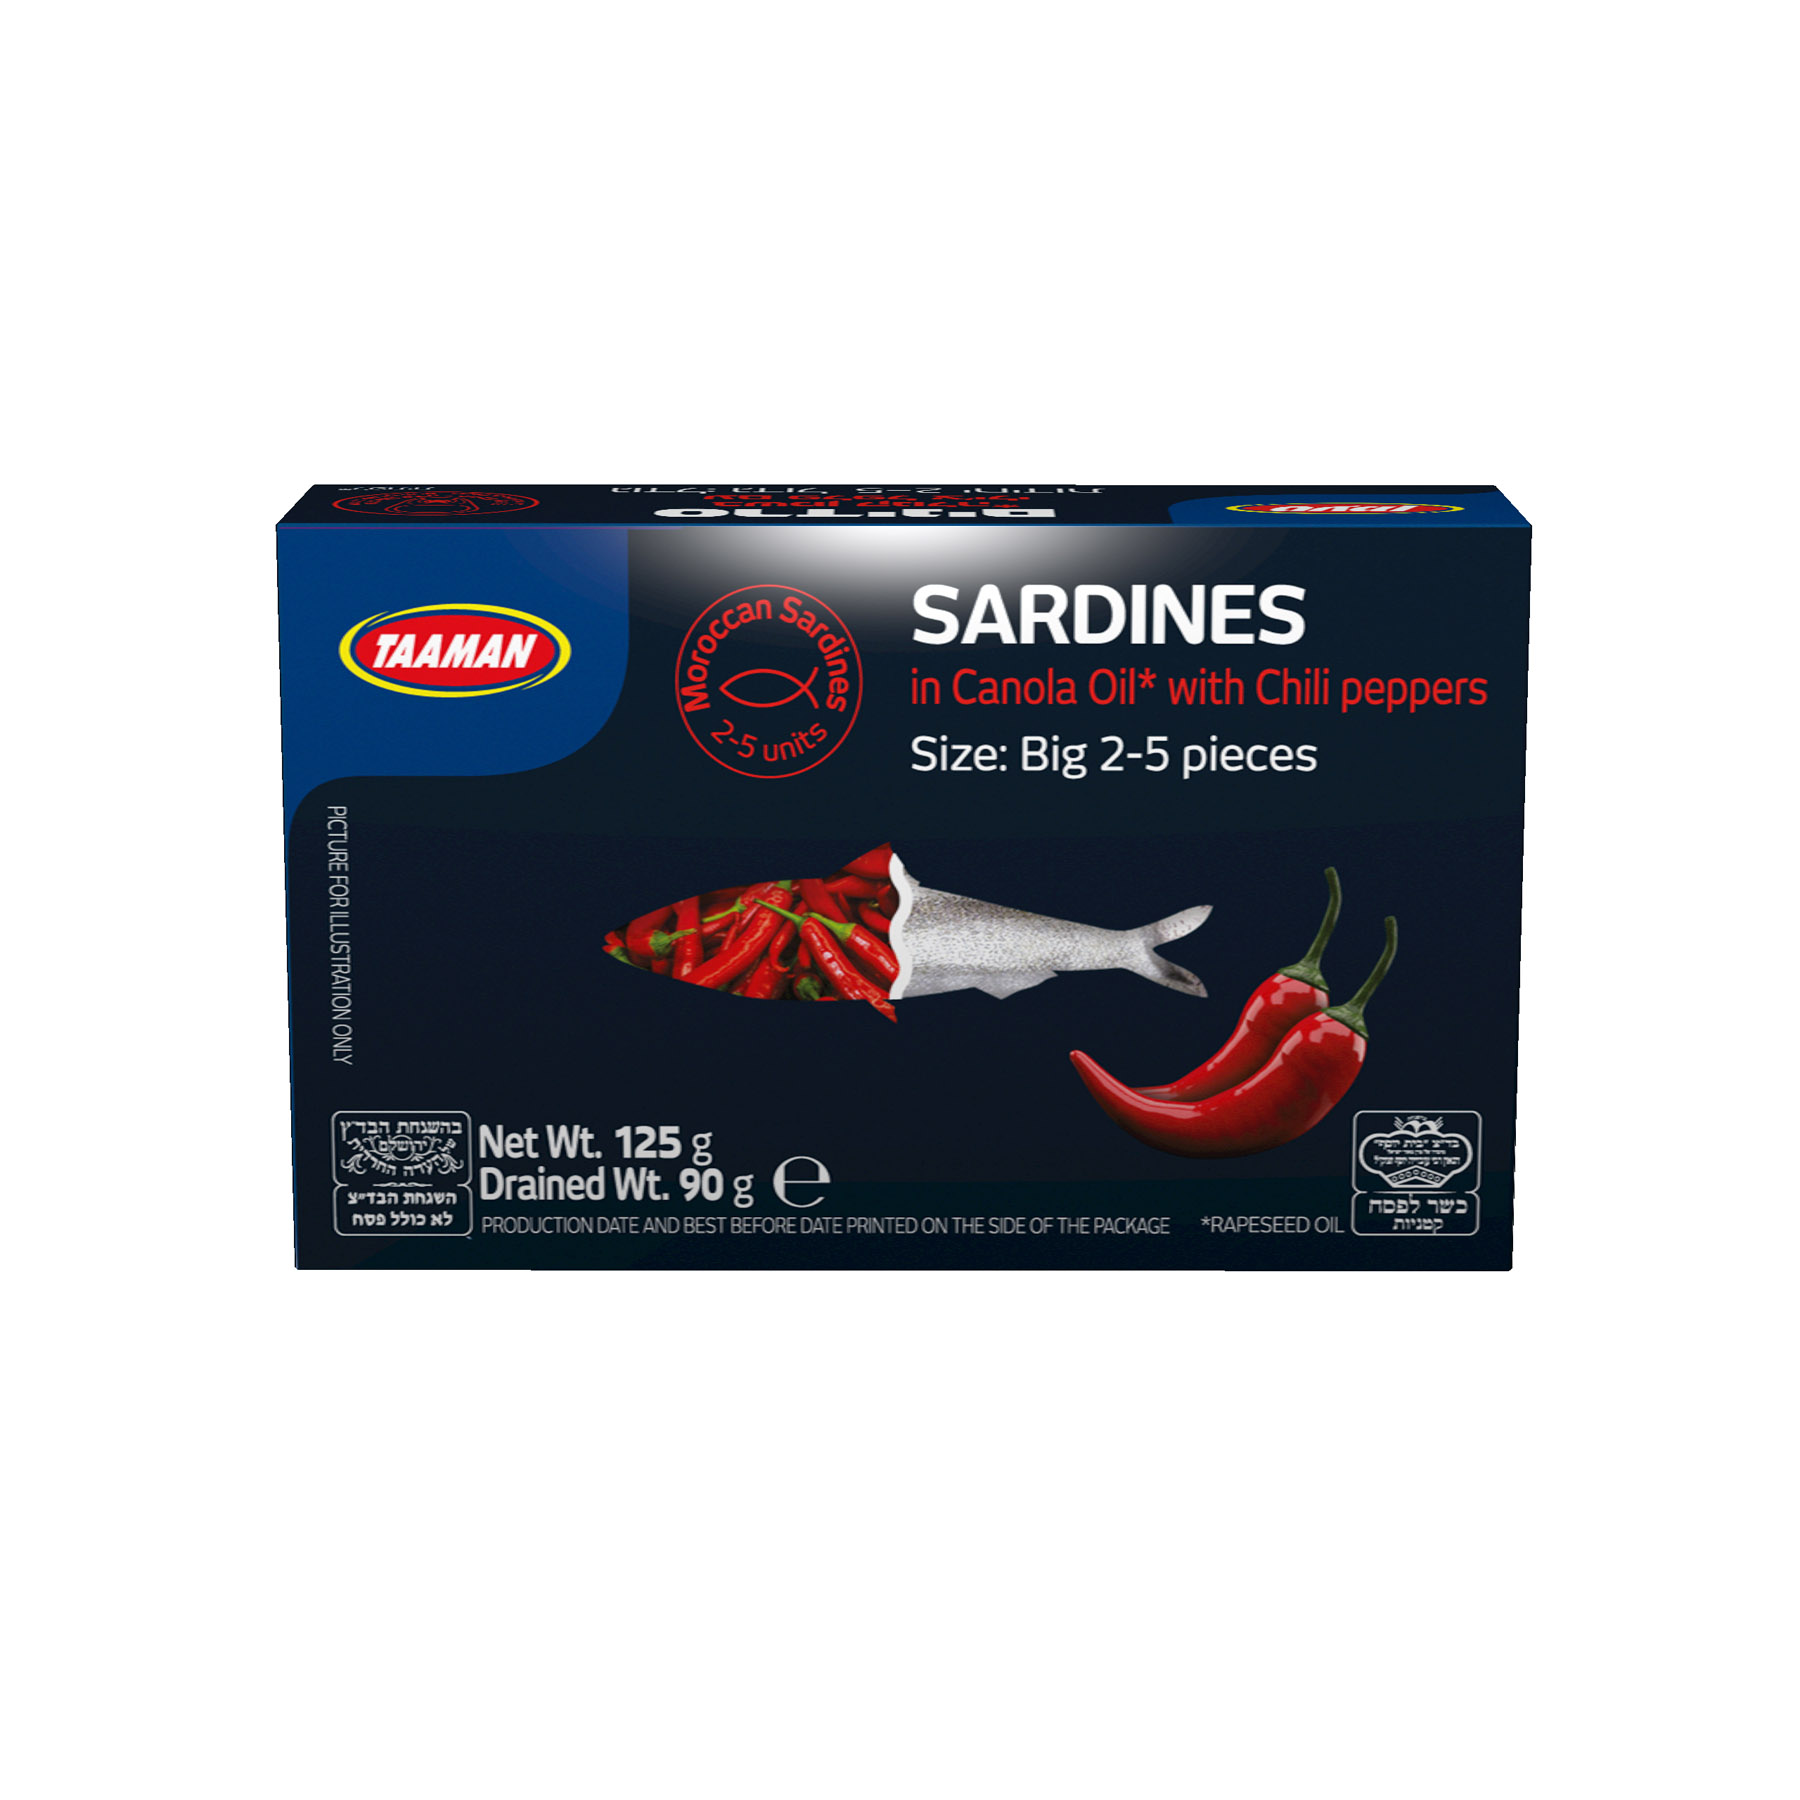 TAAMAN SARDINES IN CANOLA OIL WITH CHILI